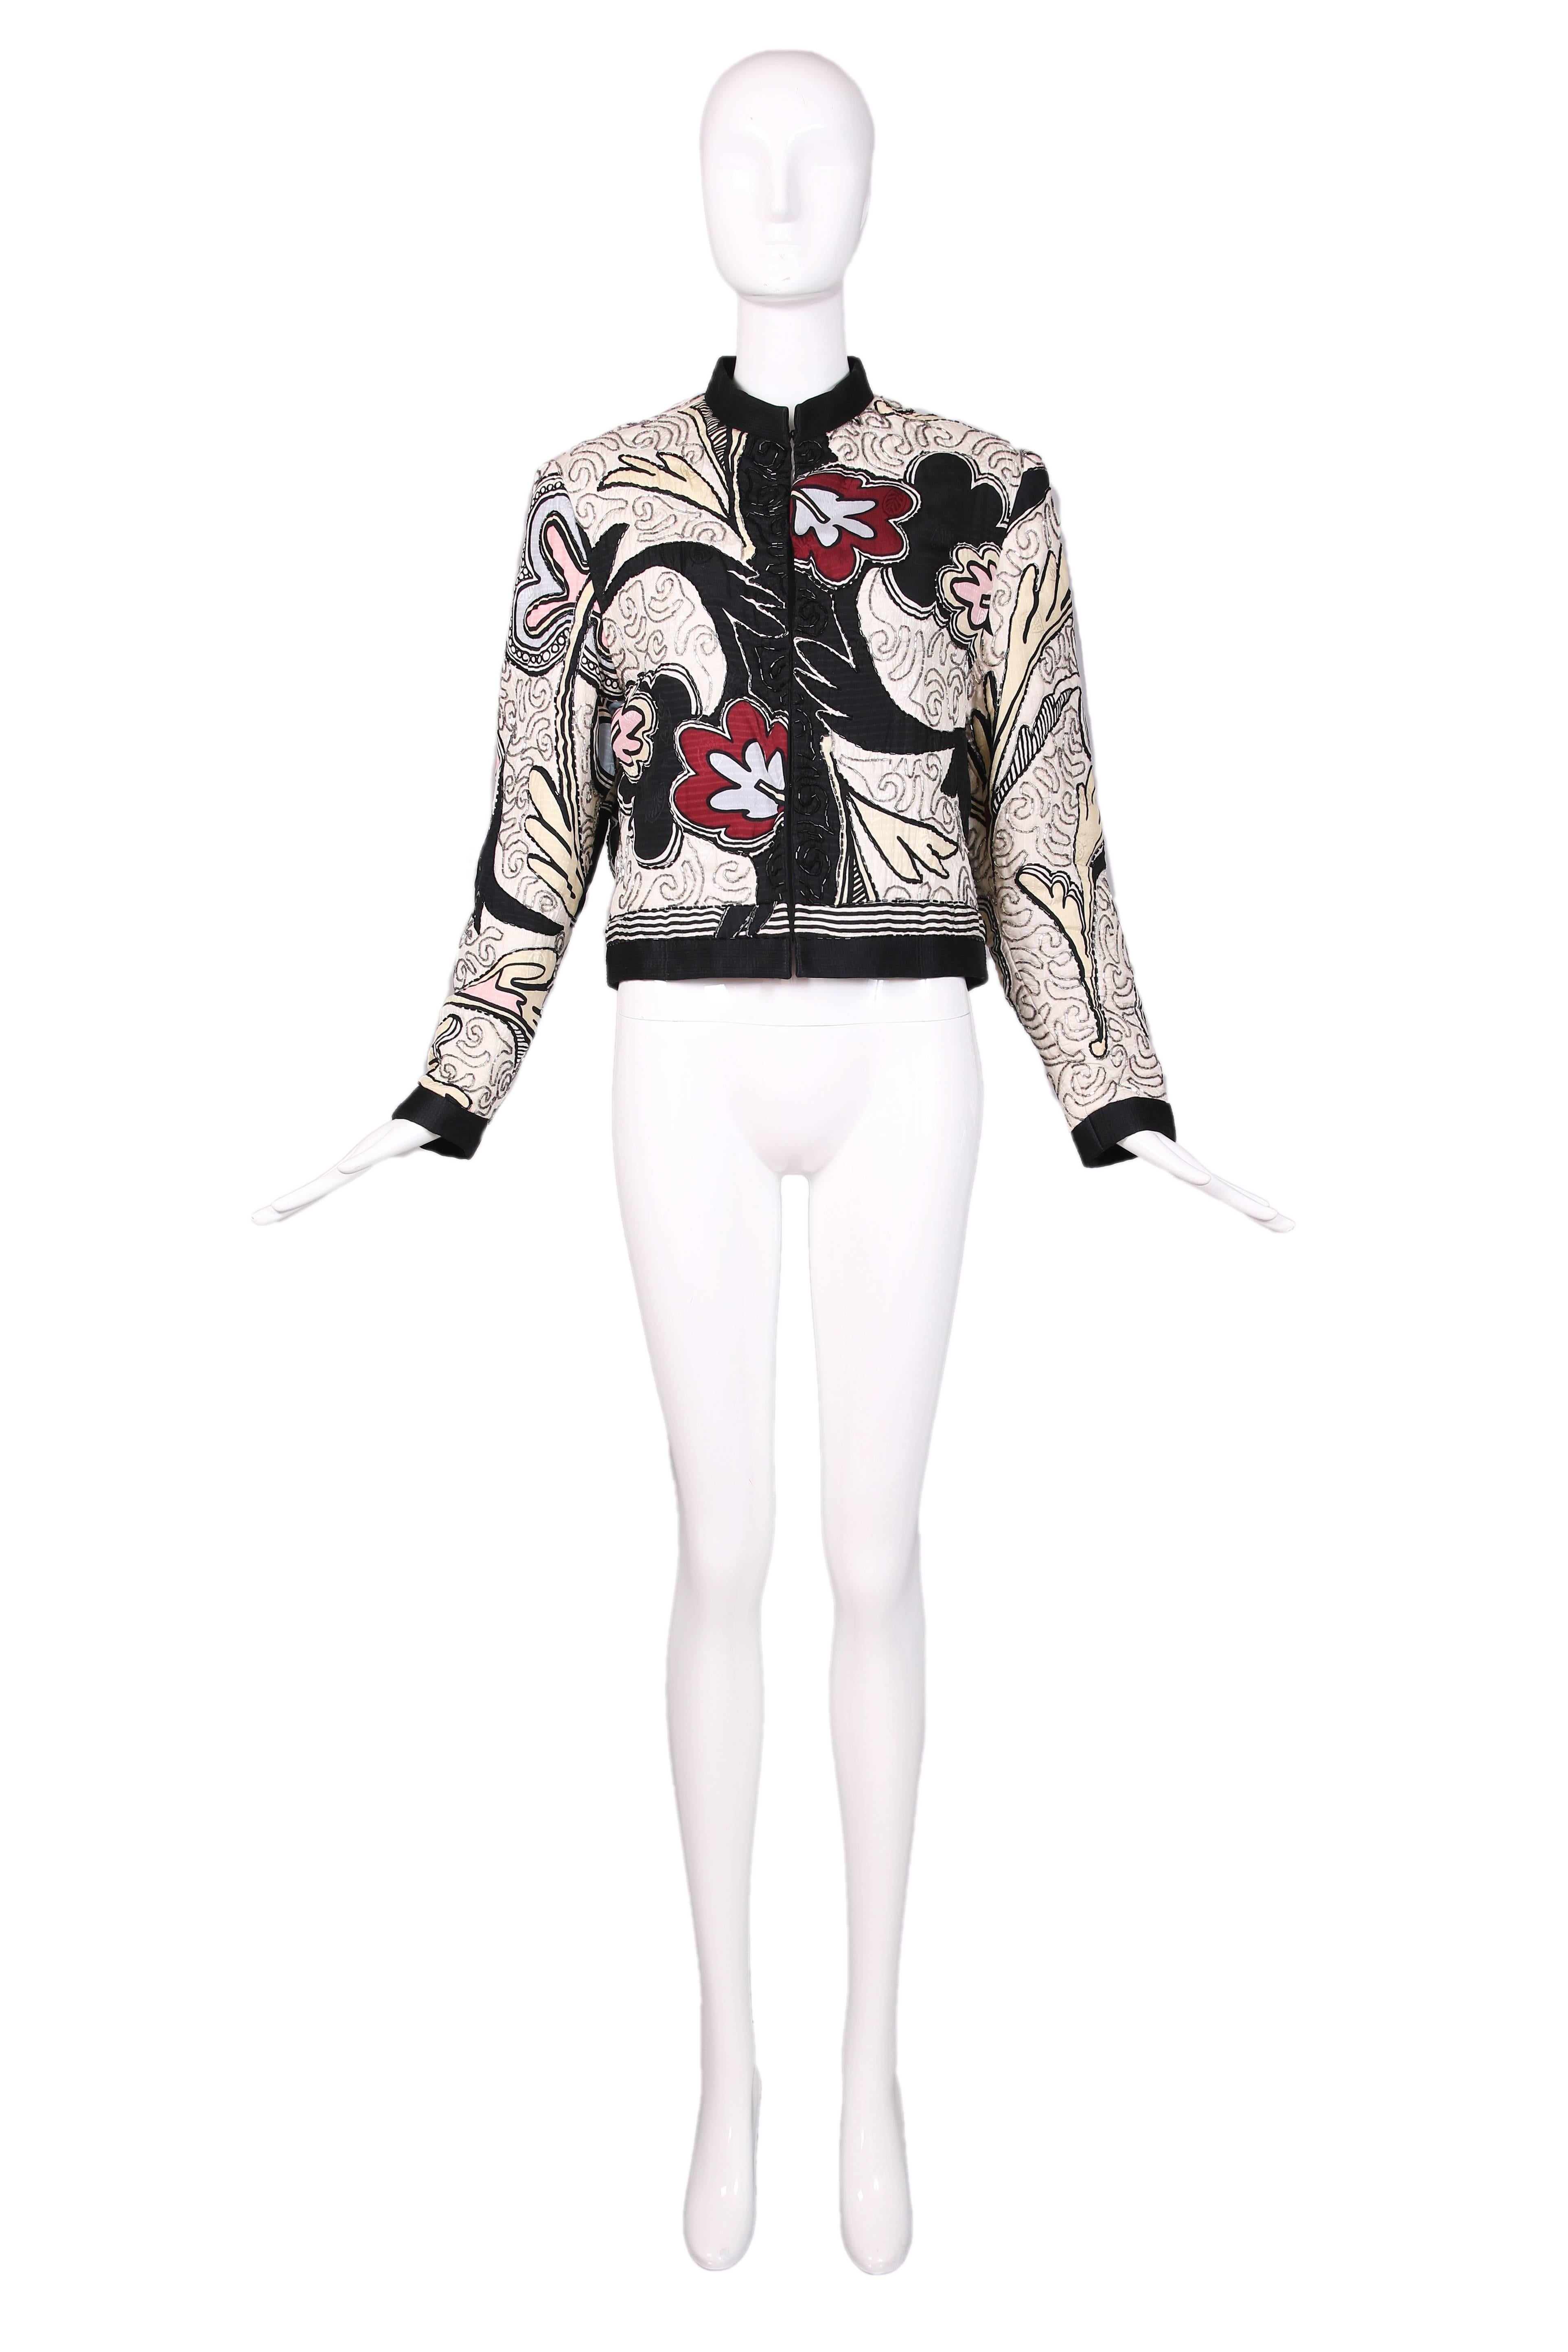 Michaele Vollbracht silk beaded abstract print jacket with black trim and hook & eye closures down the front. Jacket embellished throughout with silver and black bugle beads. "Michaele Vollbrach" signature printed at back. Fully lined